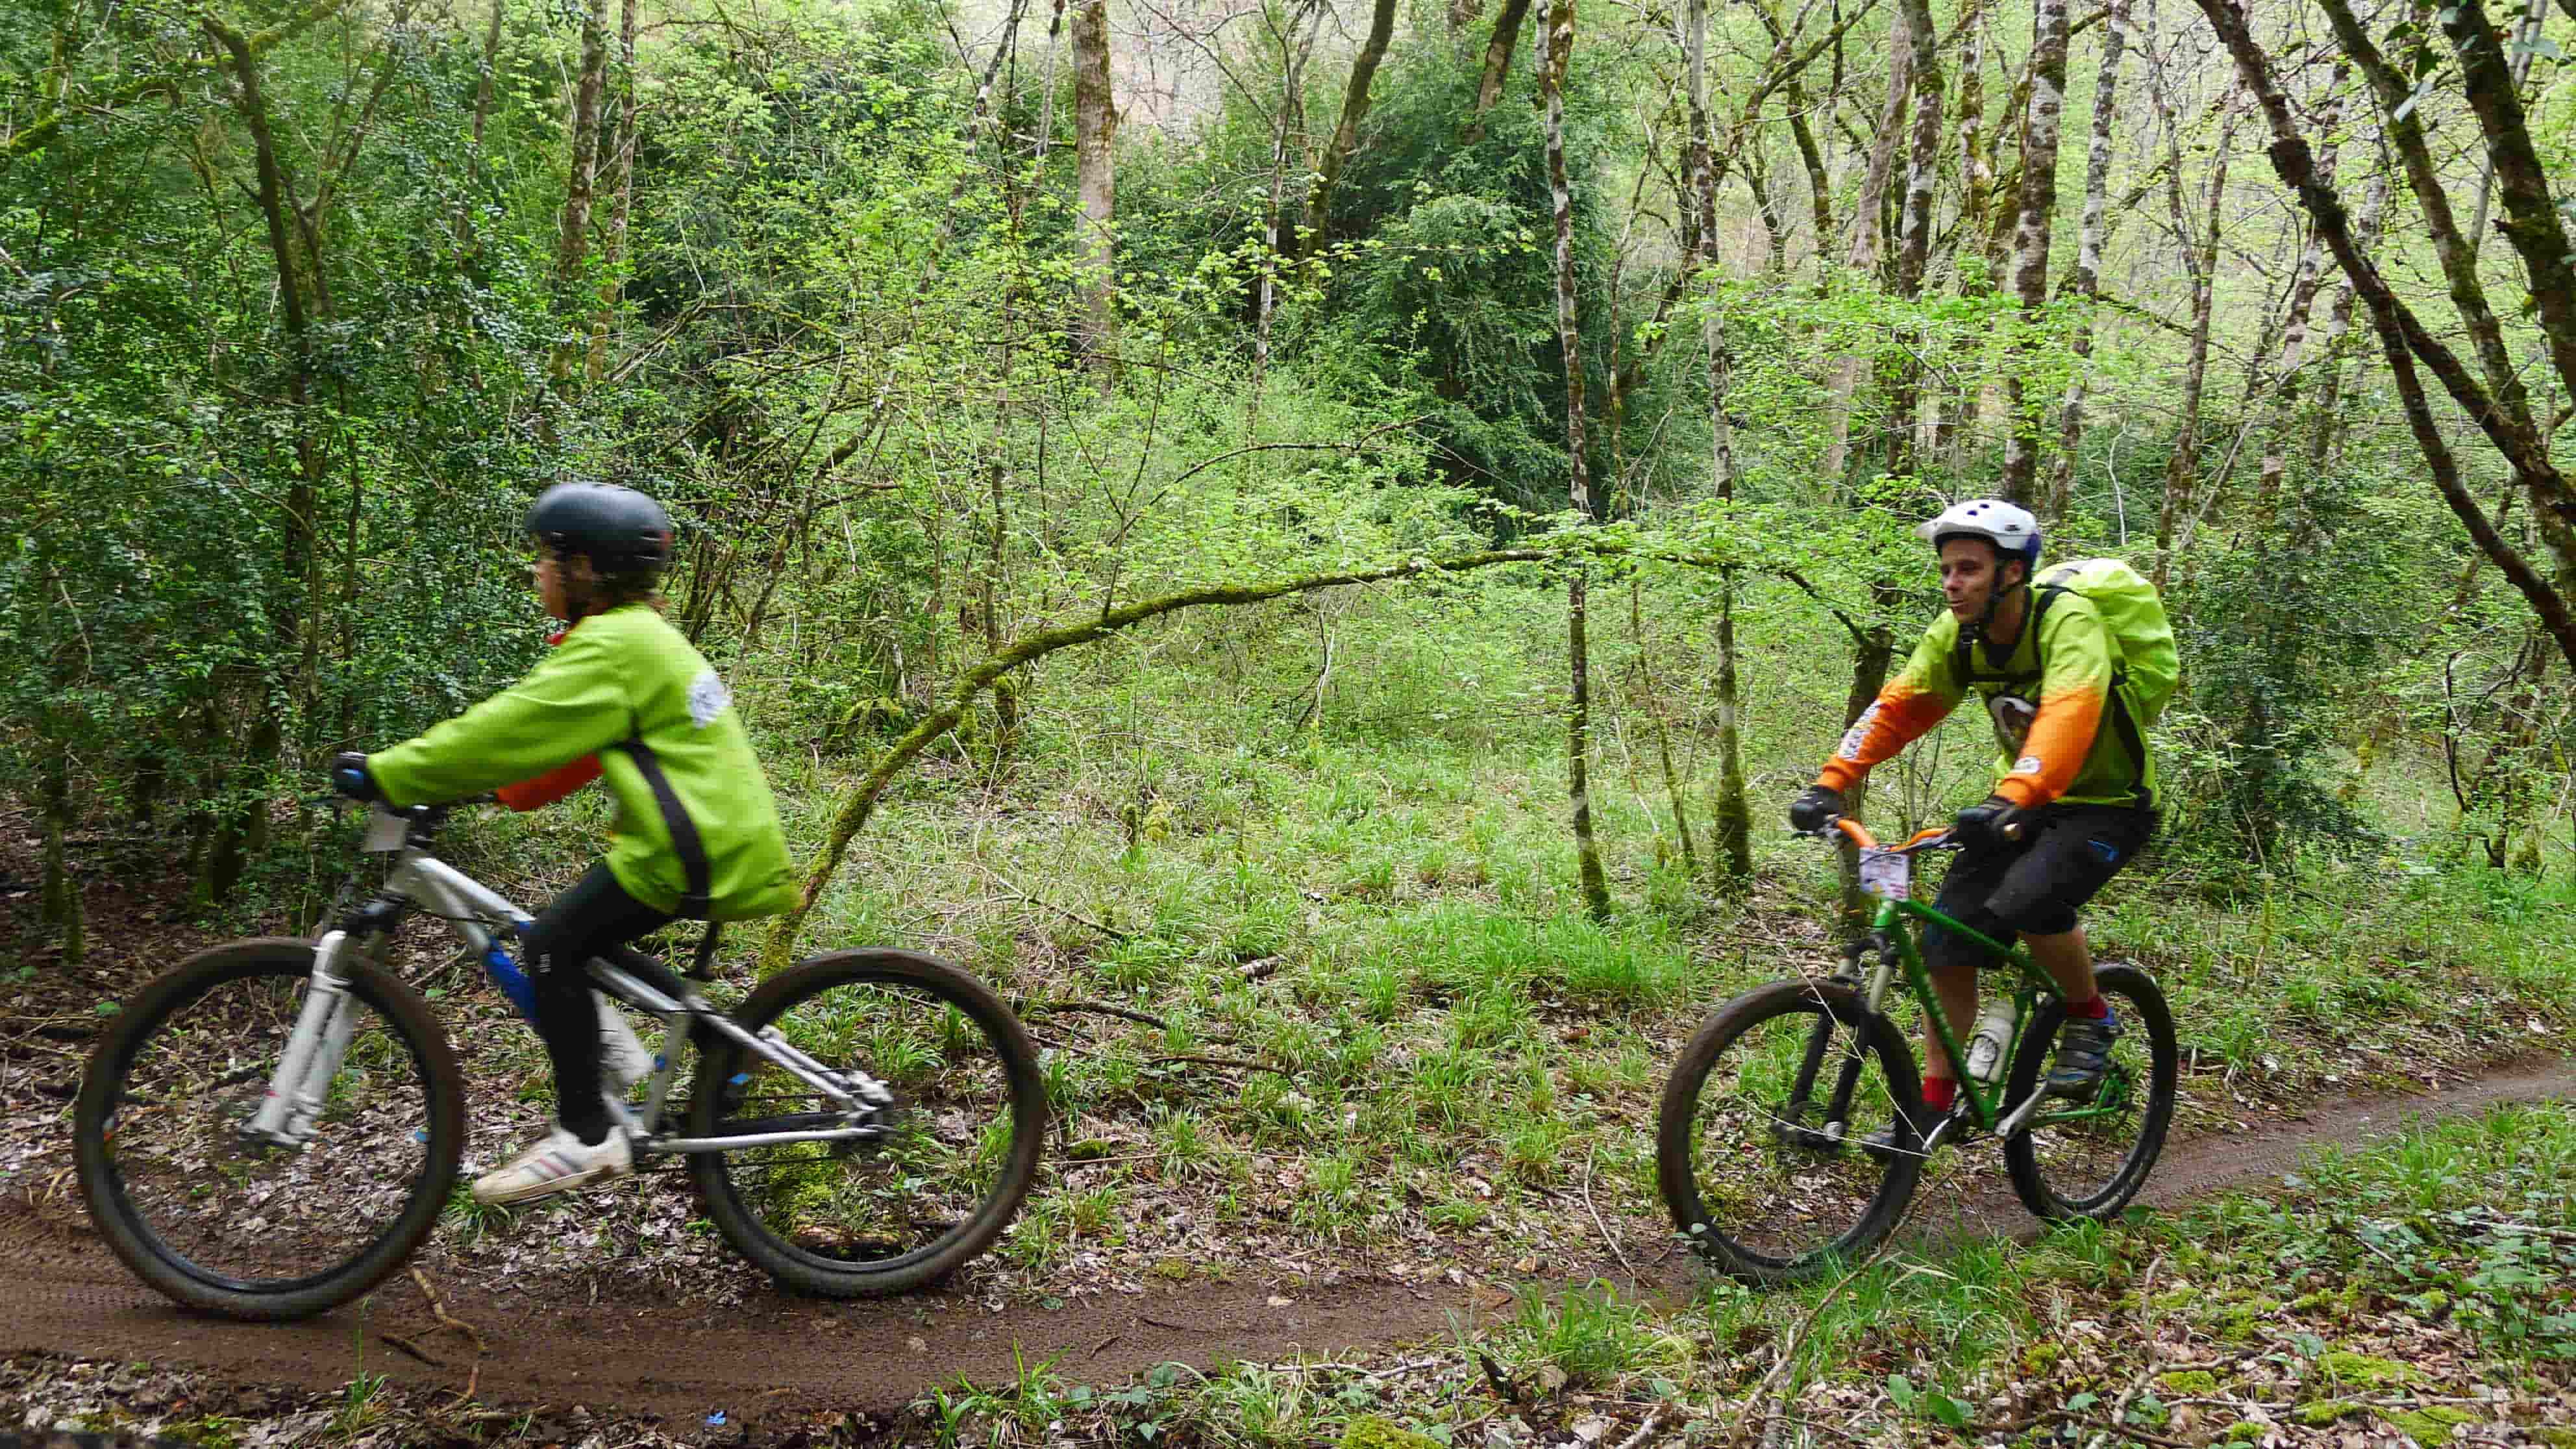 Left side of 2 young cyclists, riding on their bike in single file, on a dirt trail in the woods